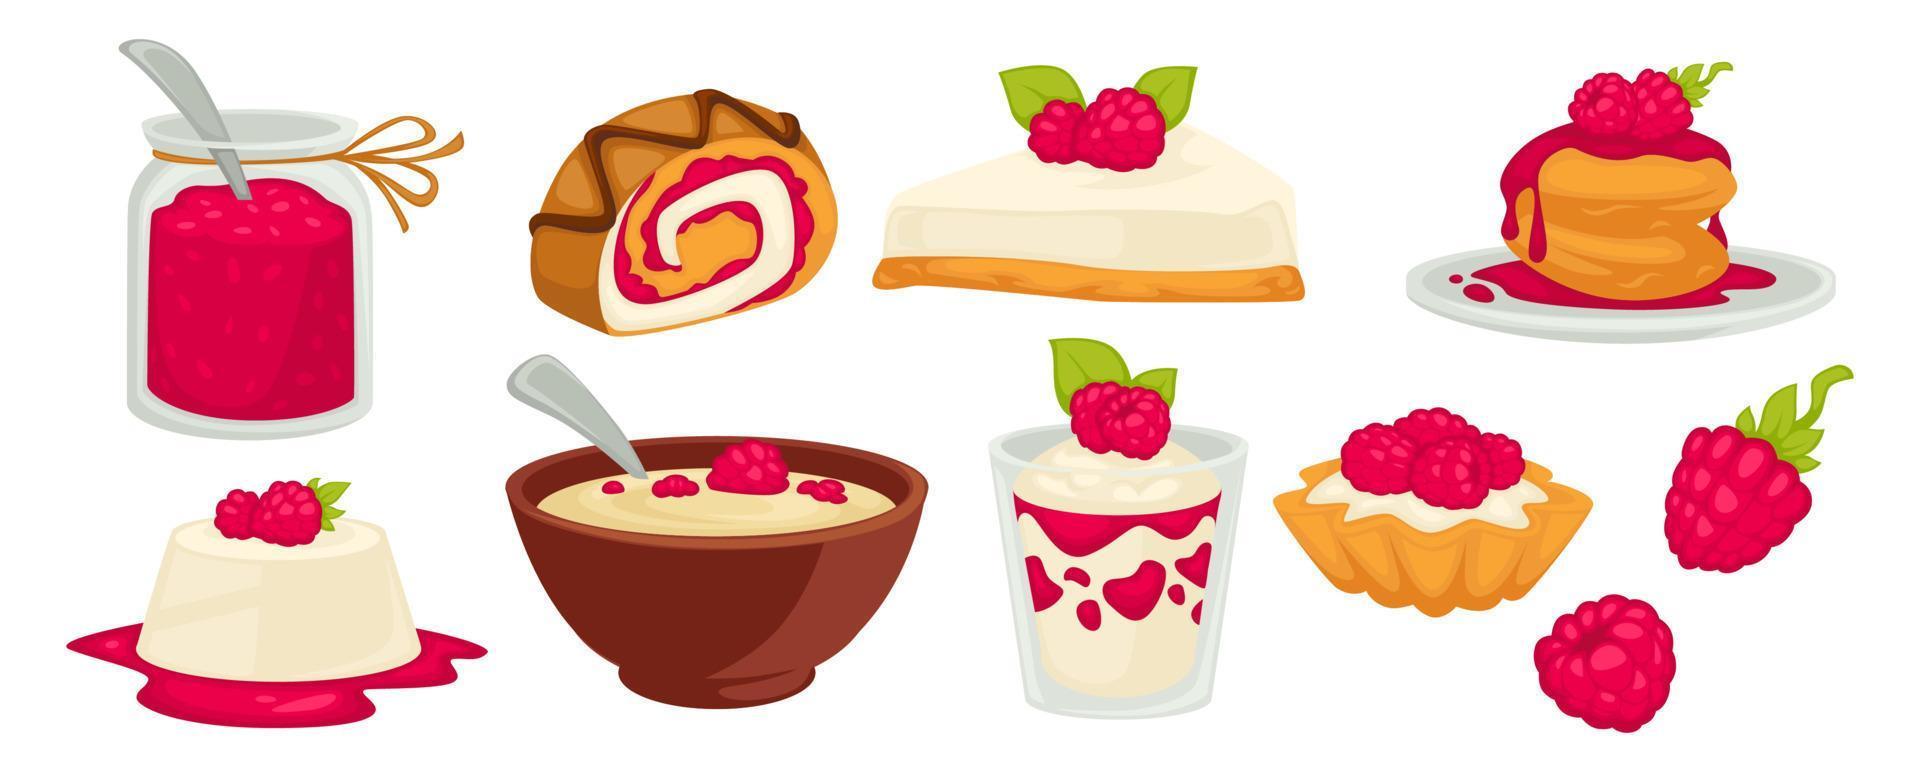 Raspberry jam and cakes, pancakes and roll vector